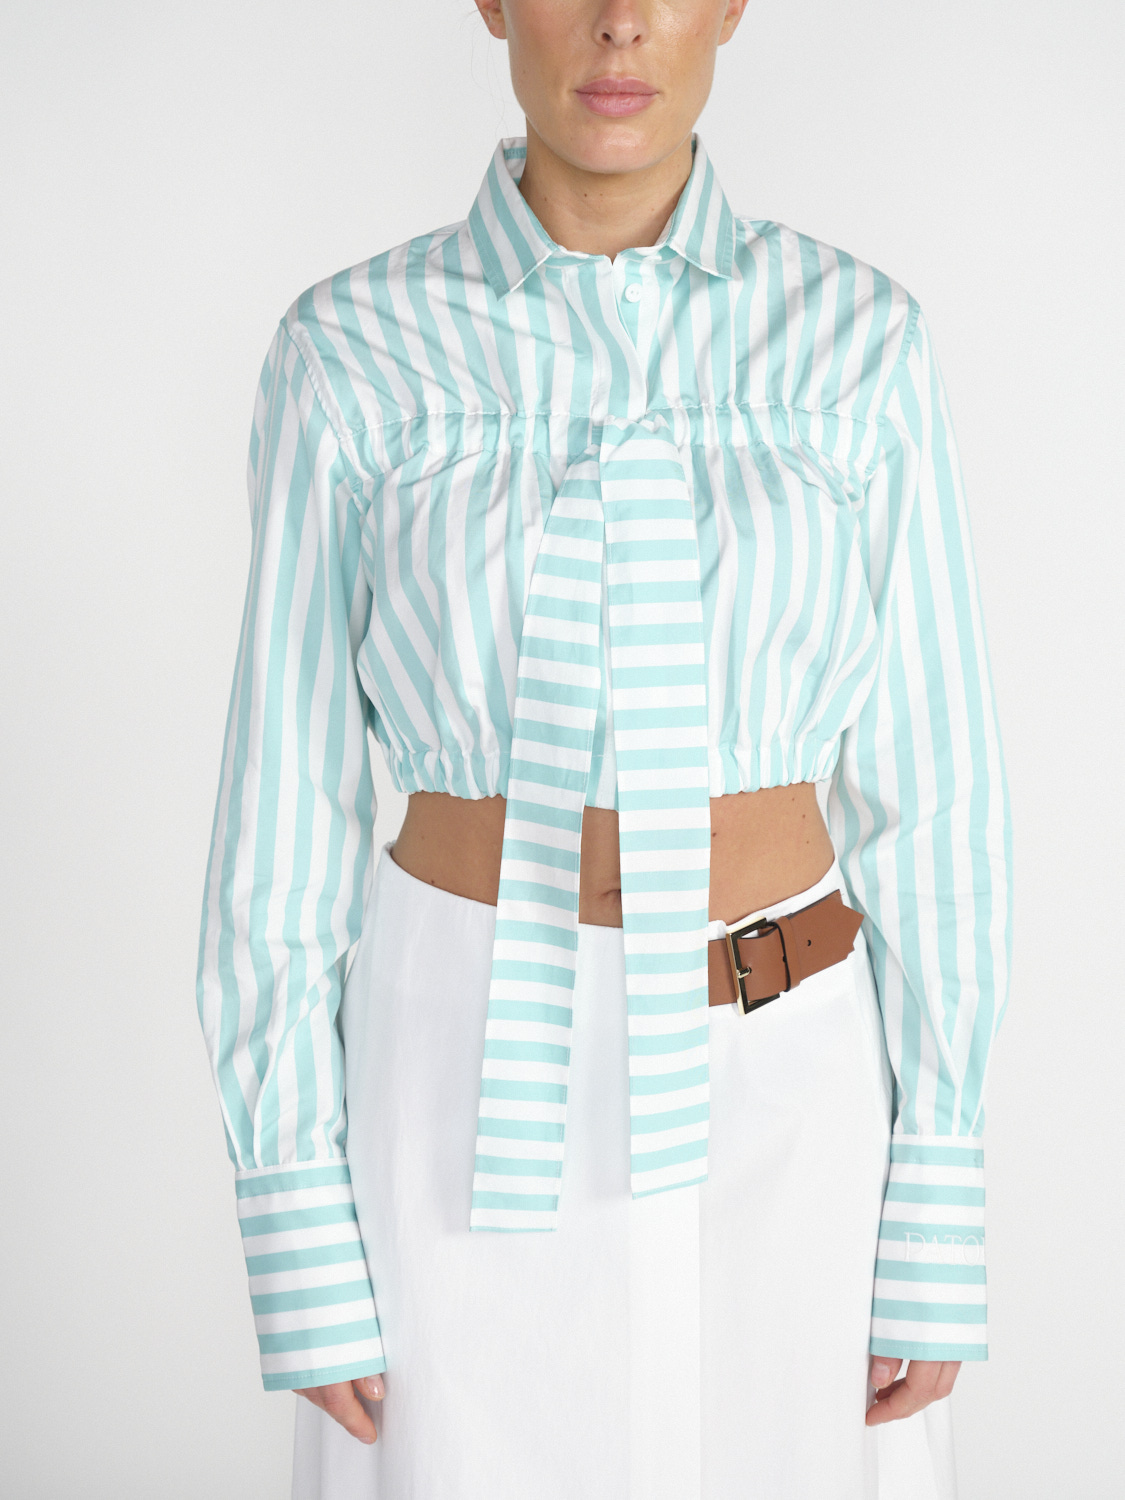 Cropped bow shirt – Gecroppte Baumwoll-Bluse